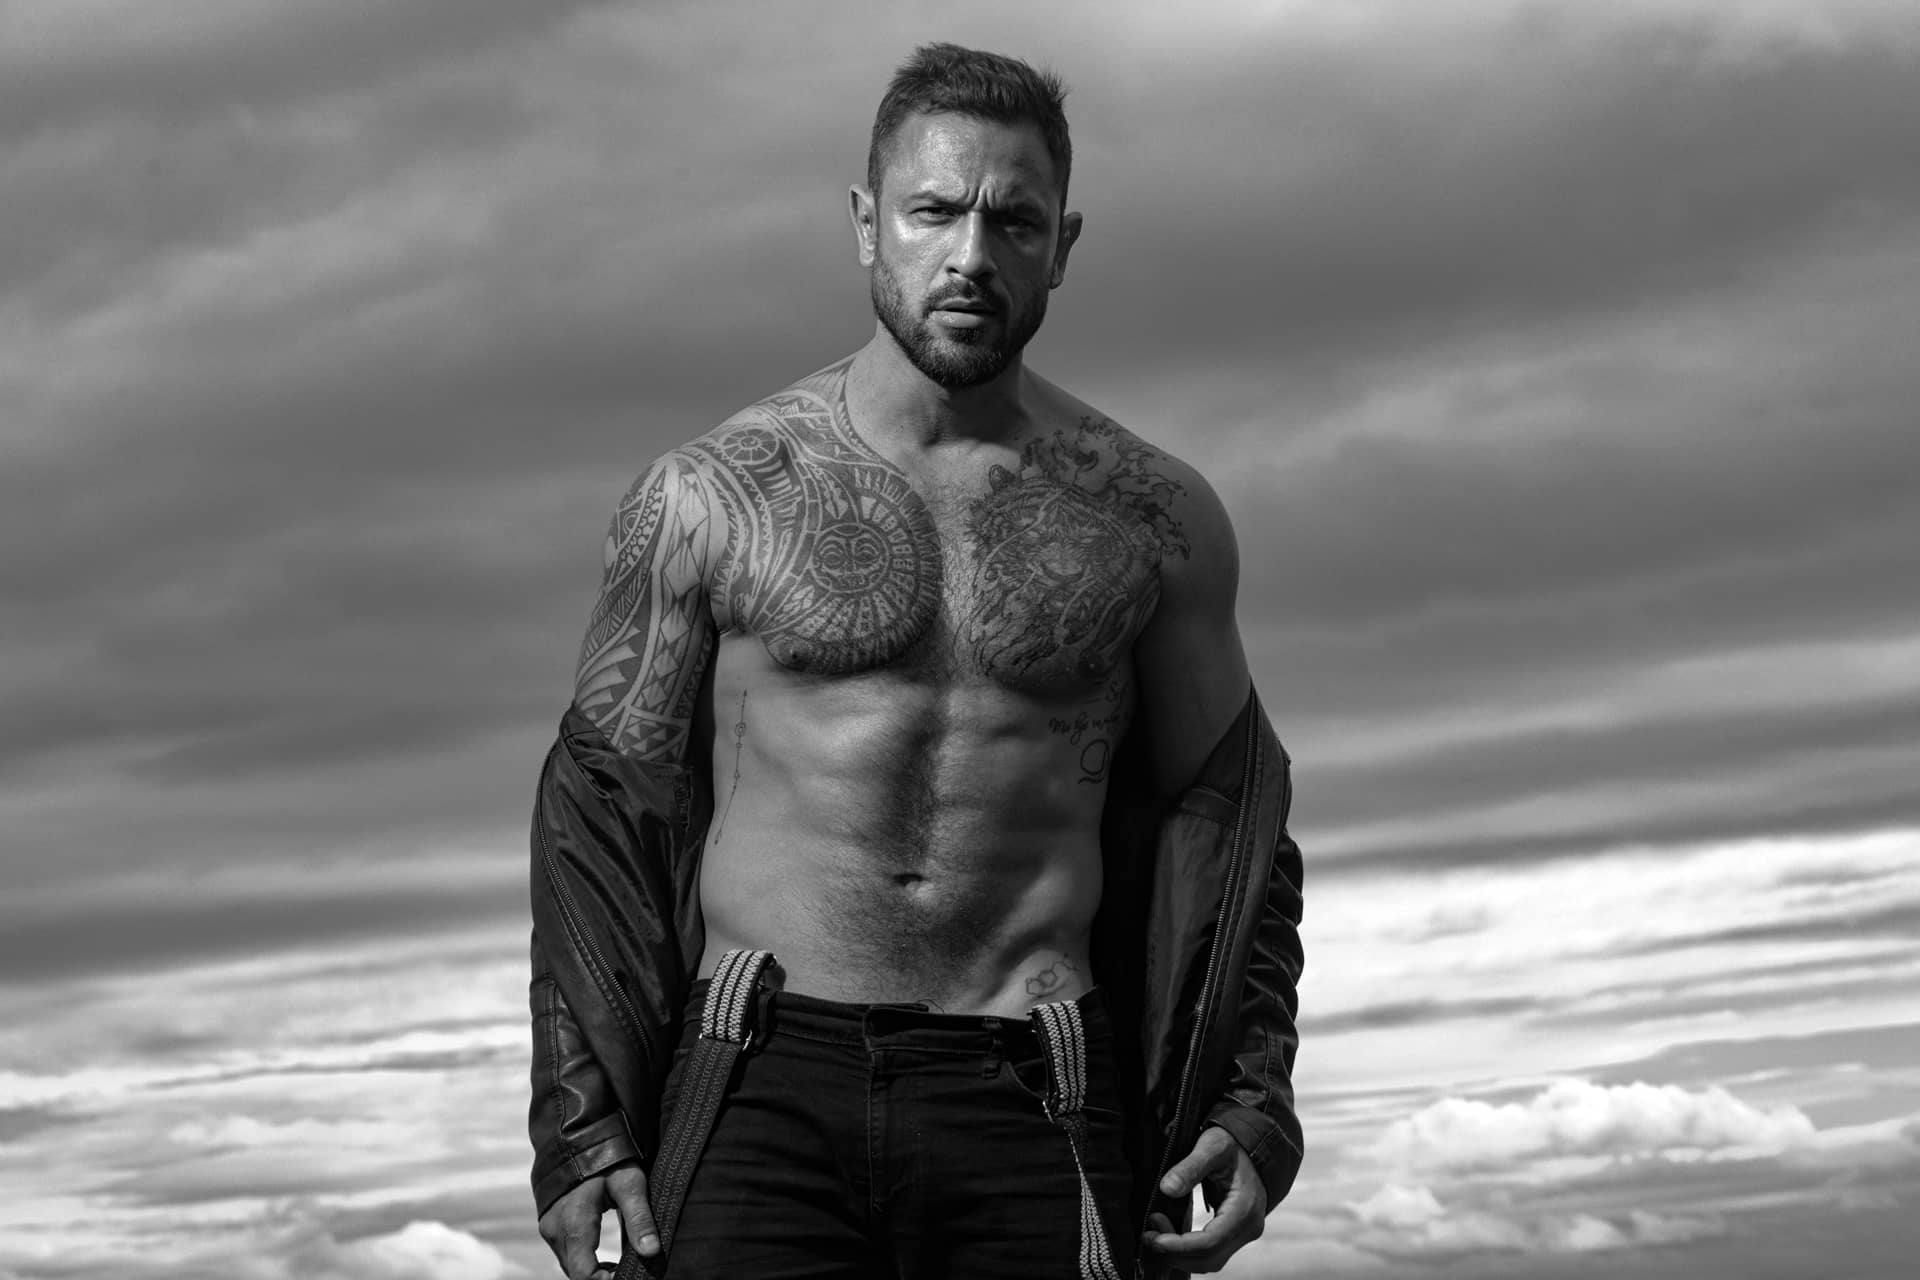 Shoulders topless athletic body fashion male model with leather jacket